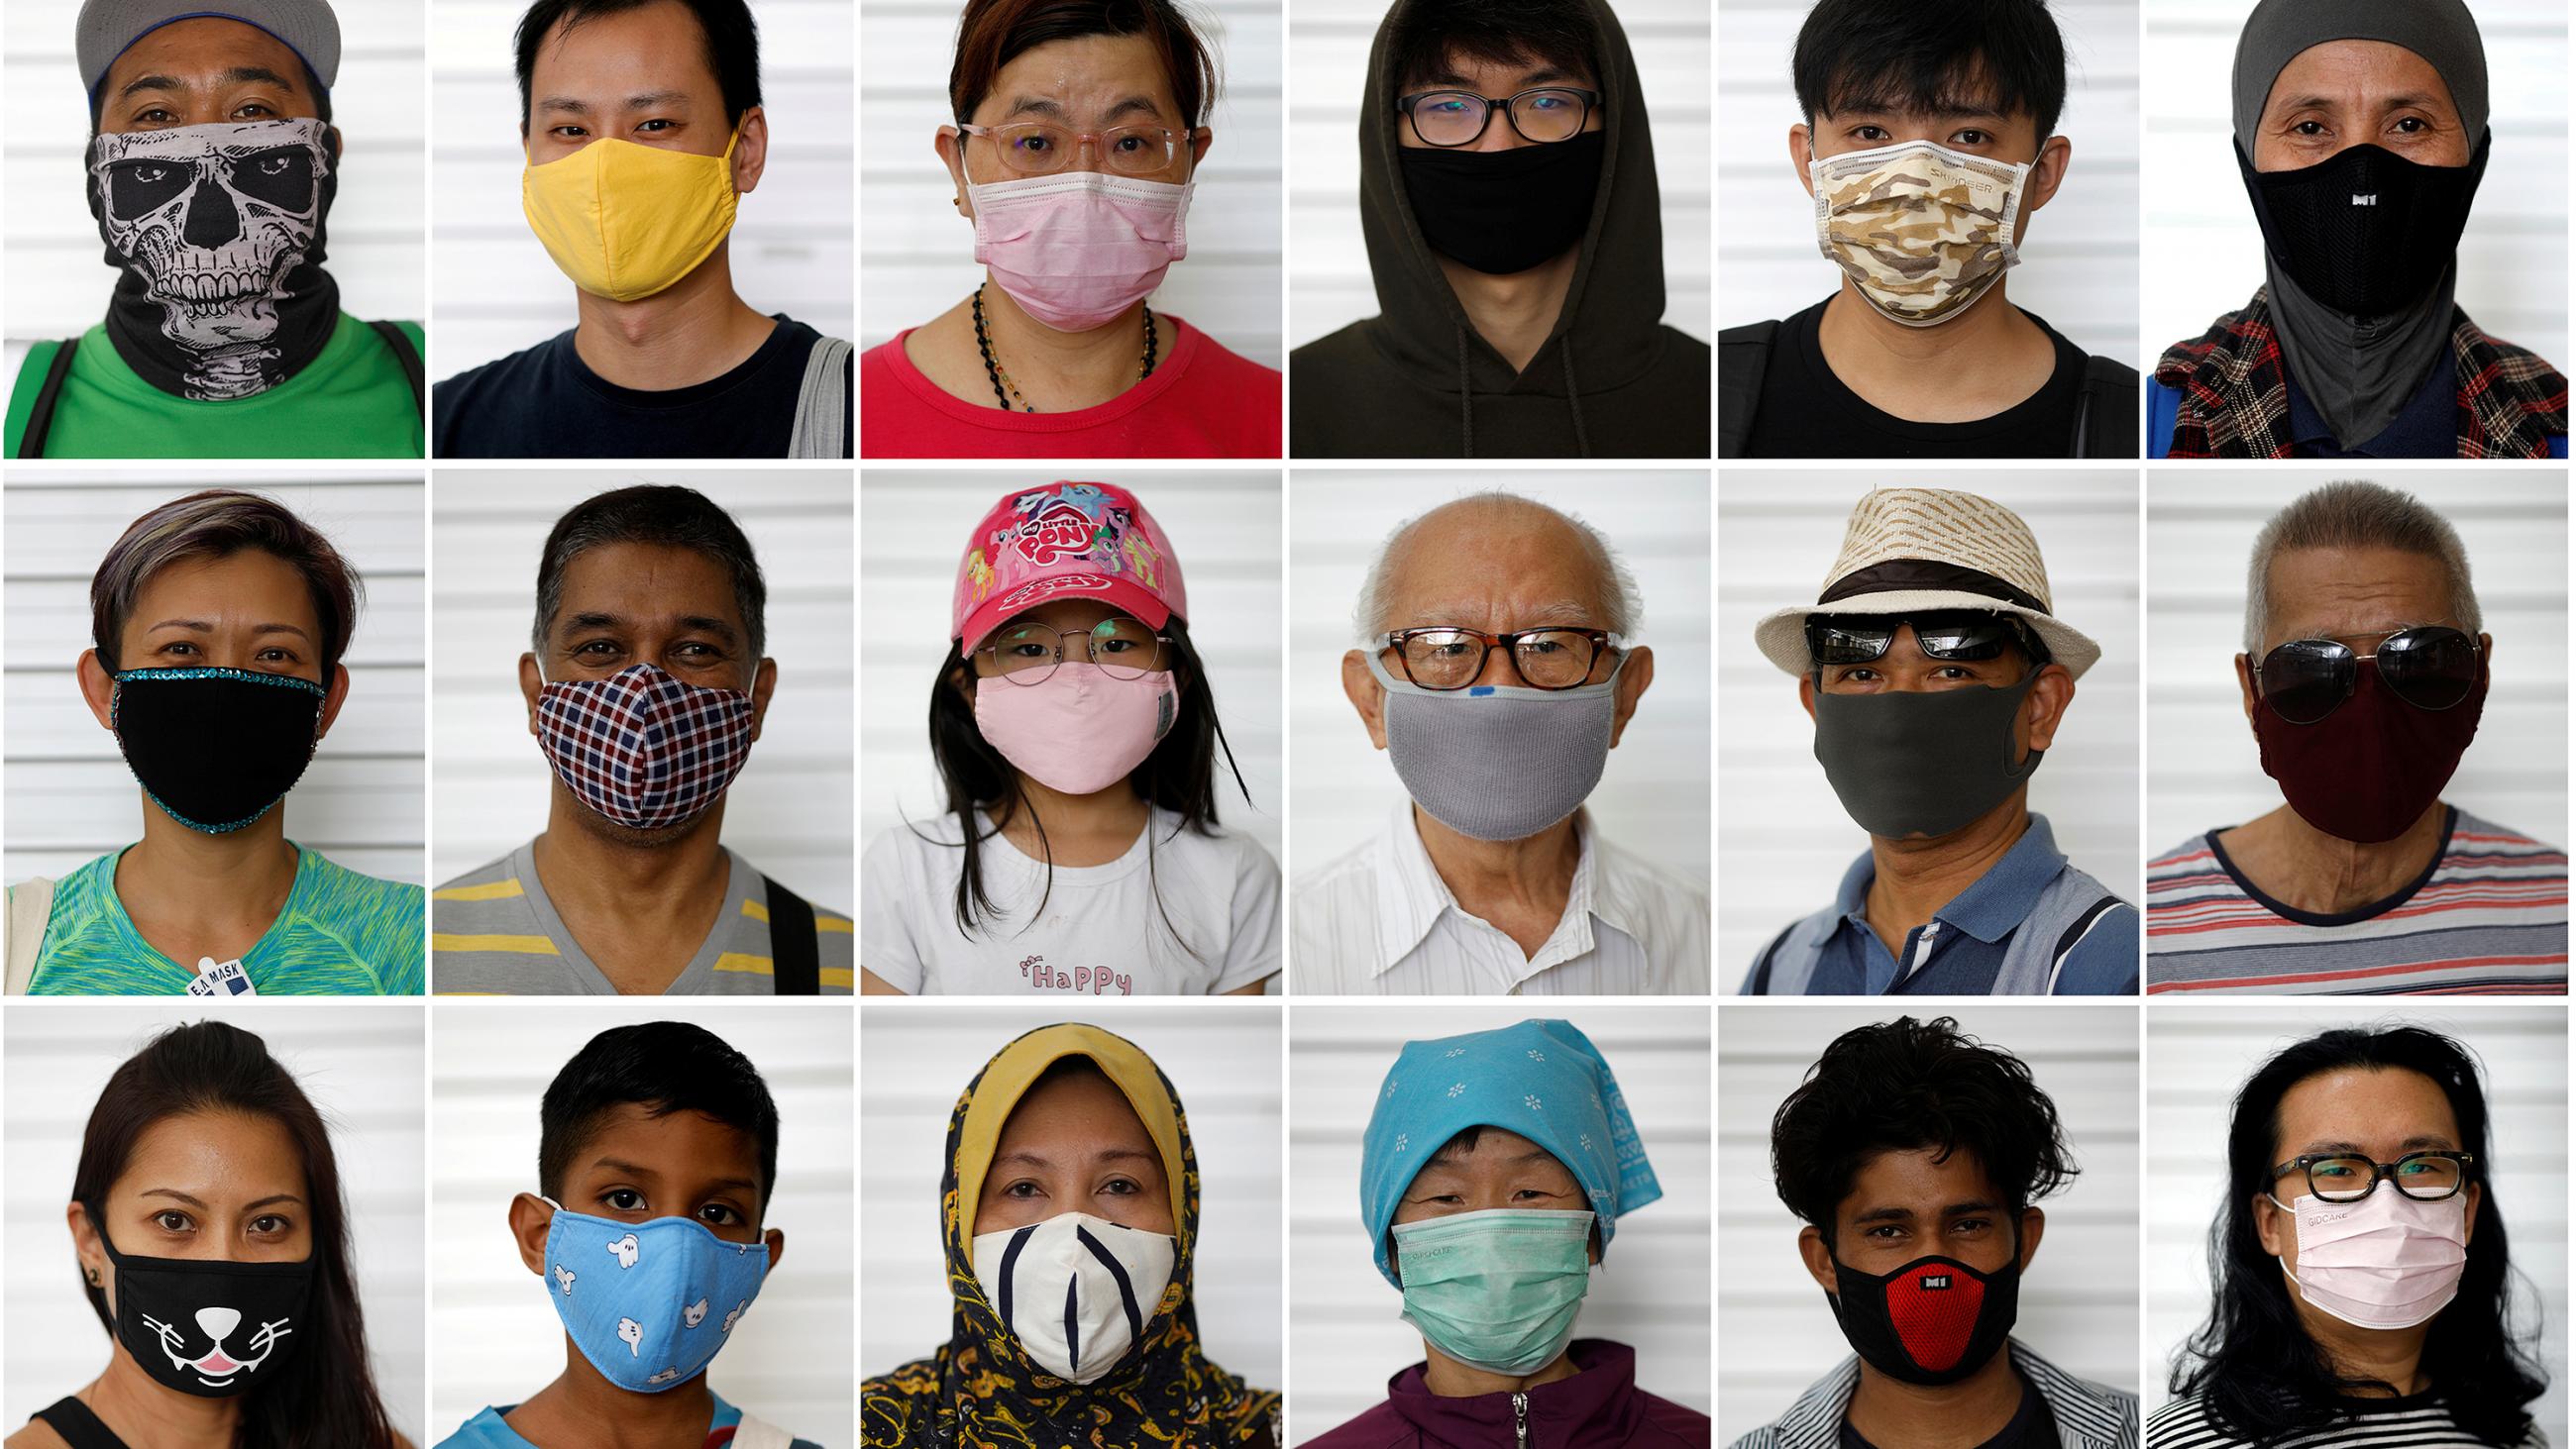 The photo shows an array of people wearing a variety of masks. 